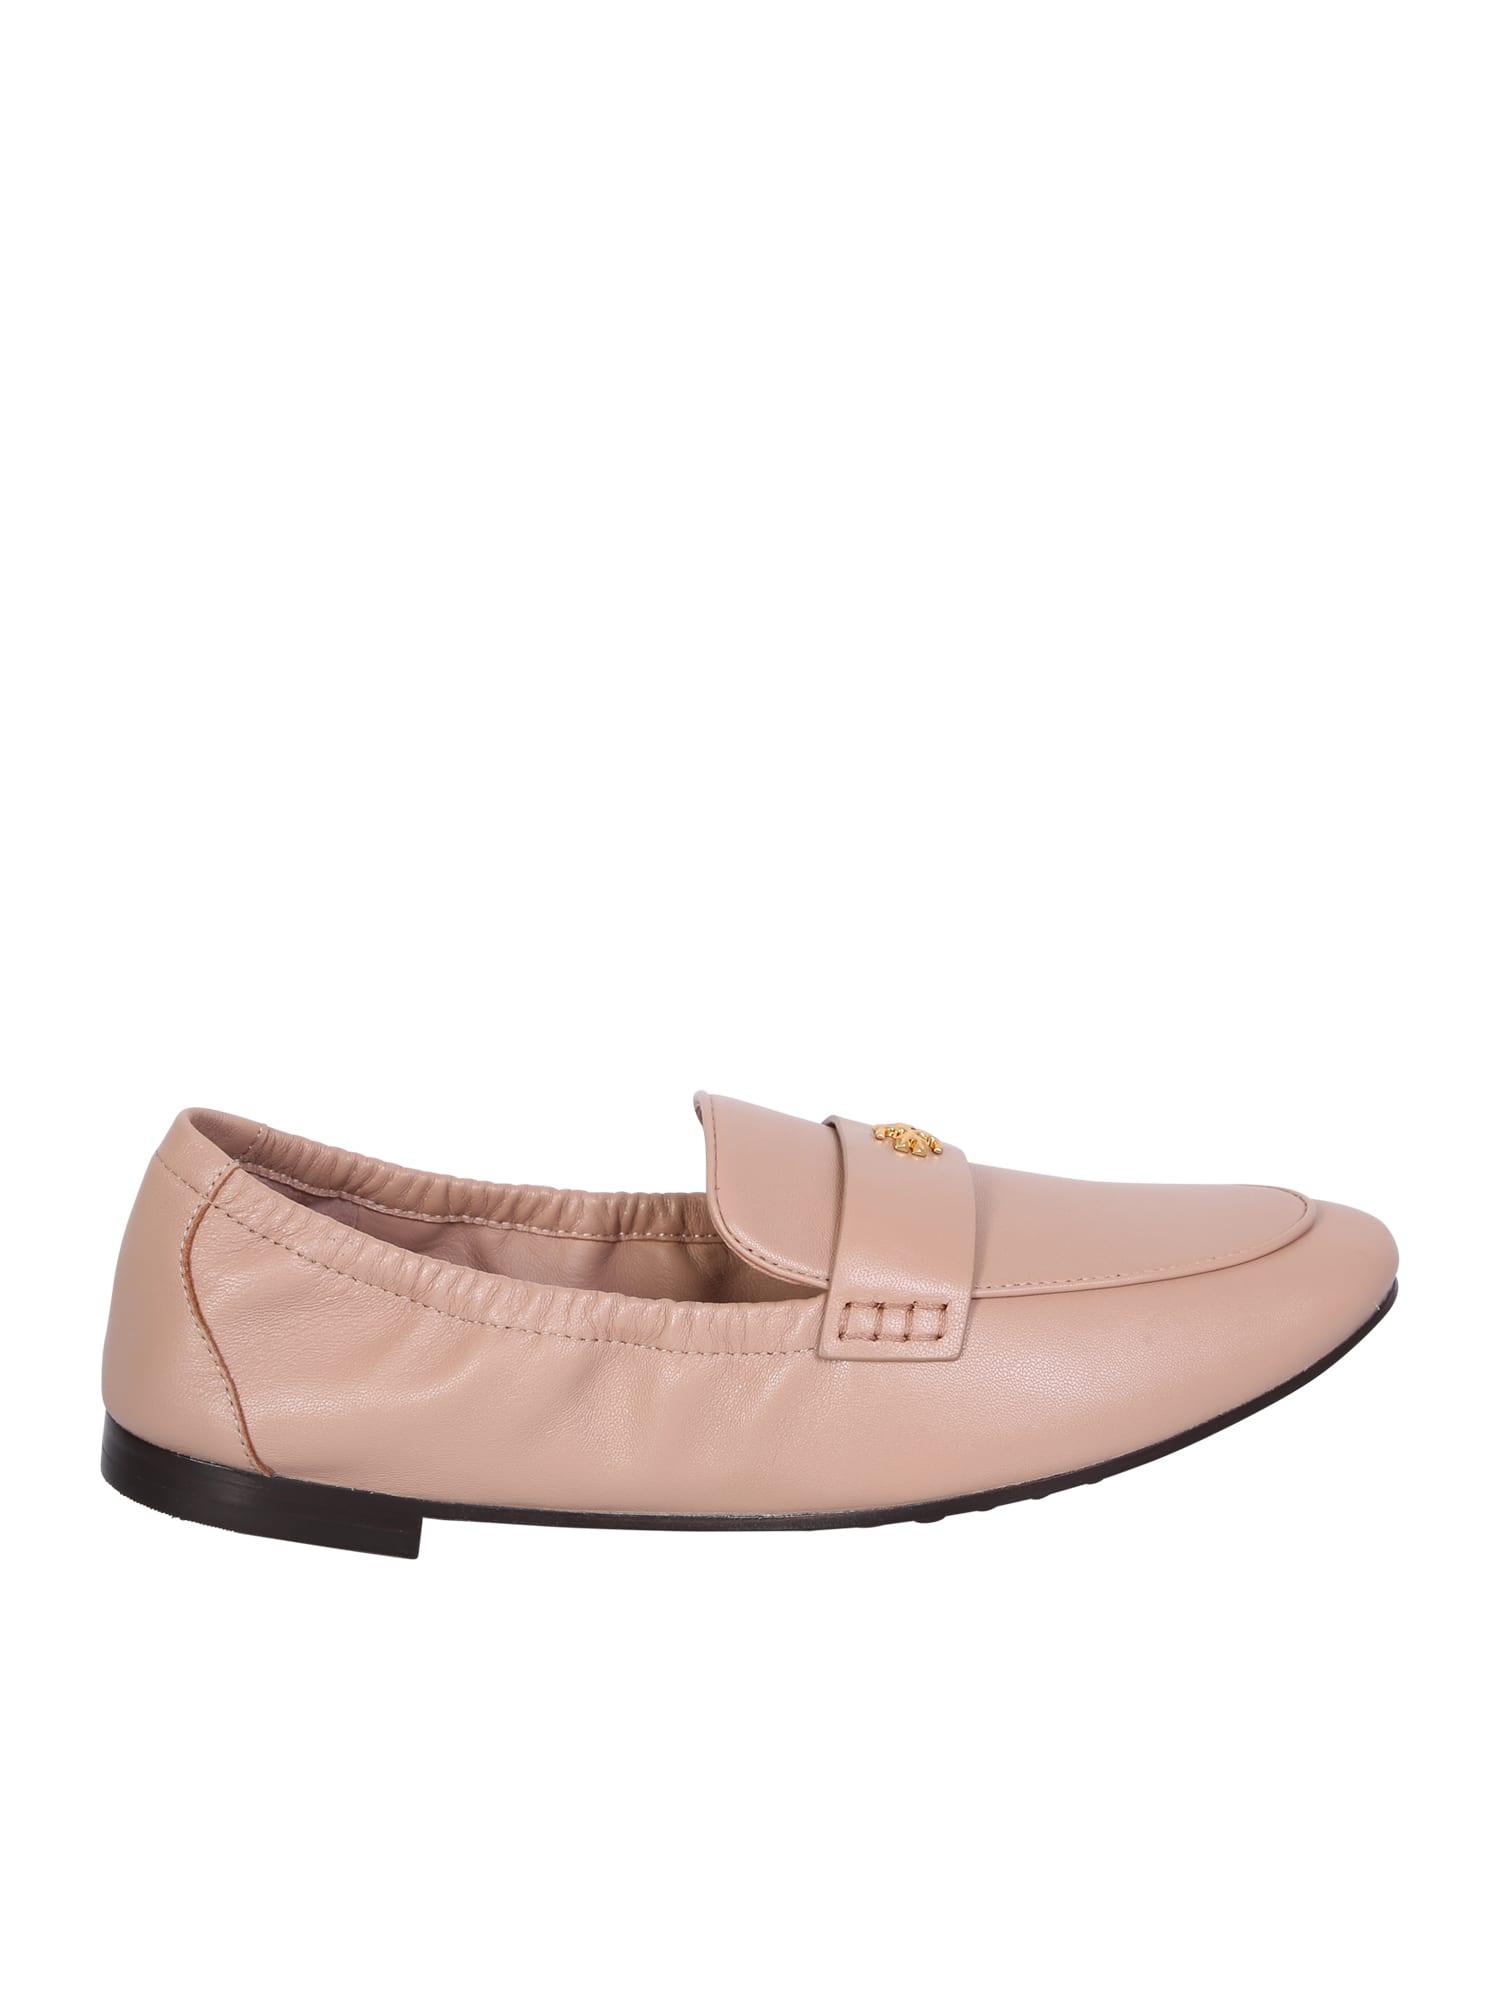 Tory Burch Loafers, Minimalist Blush-pink Design Embellished With Gold ...